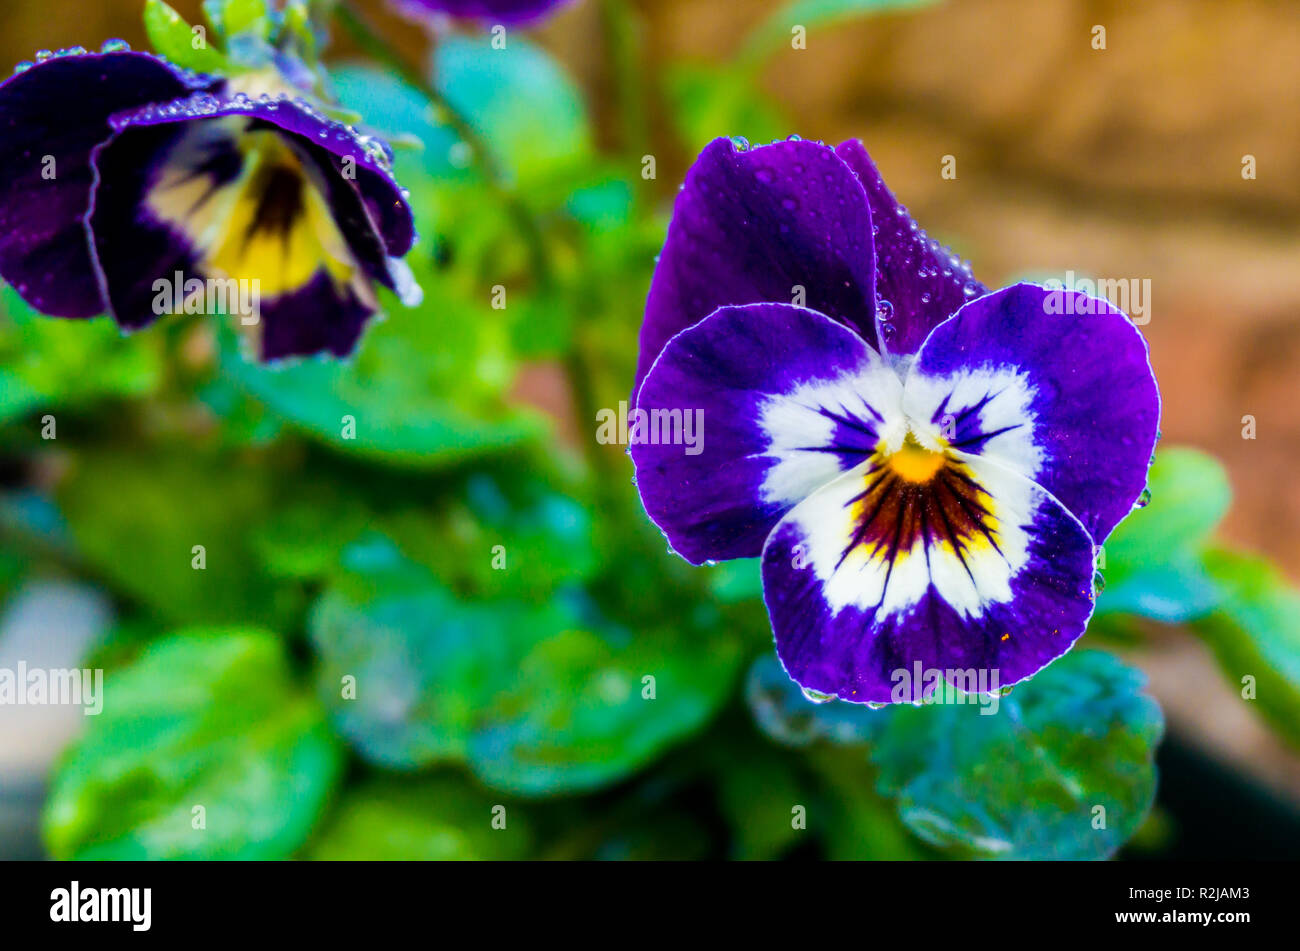 wet violet garden pansy flower covered in raindrops giving a beautiful effect macro close up nature background Stock Photo